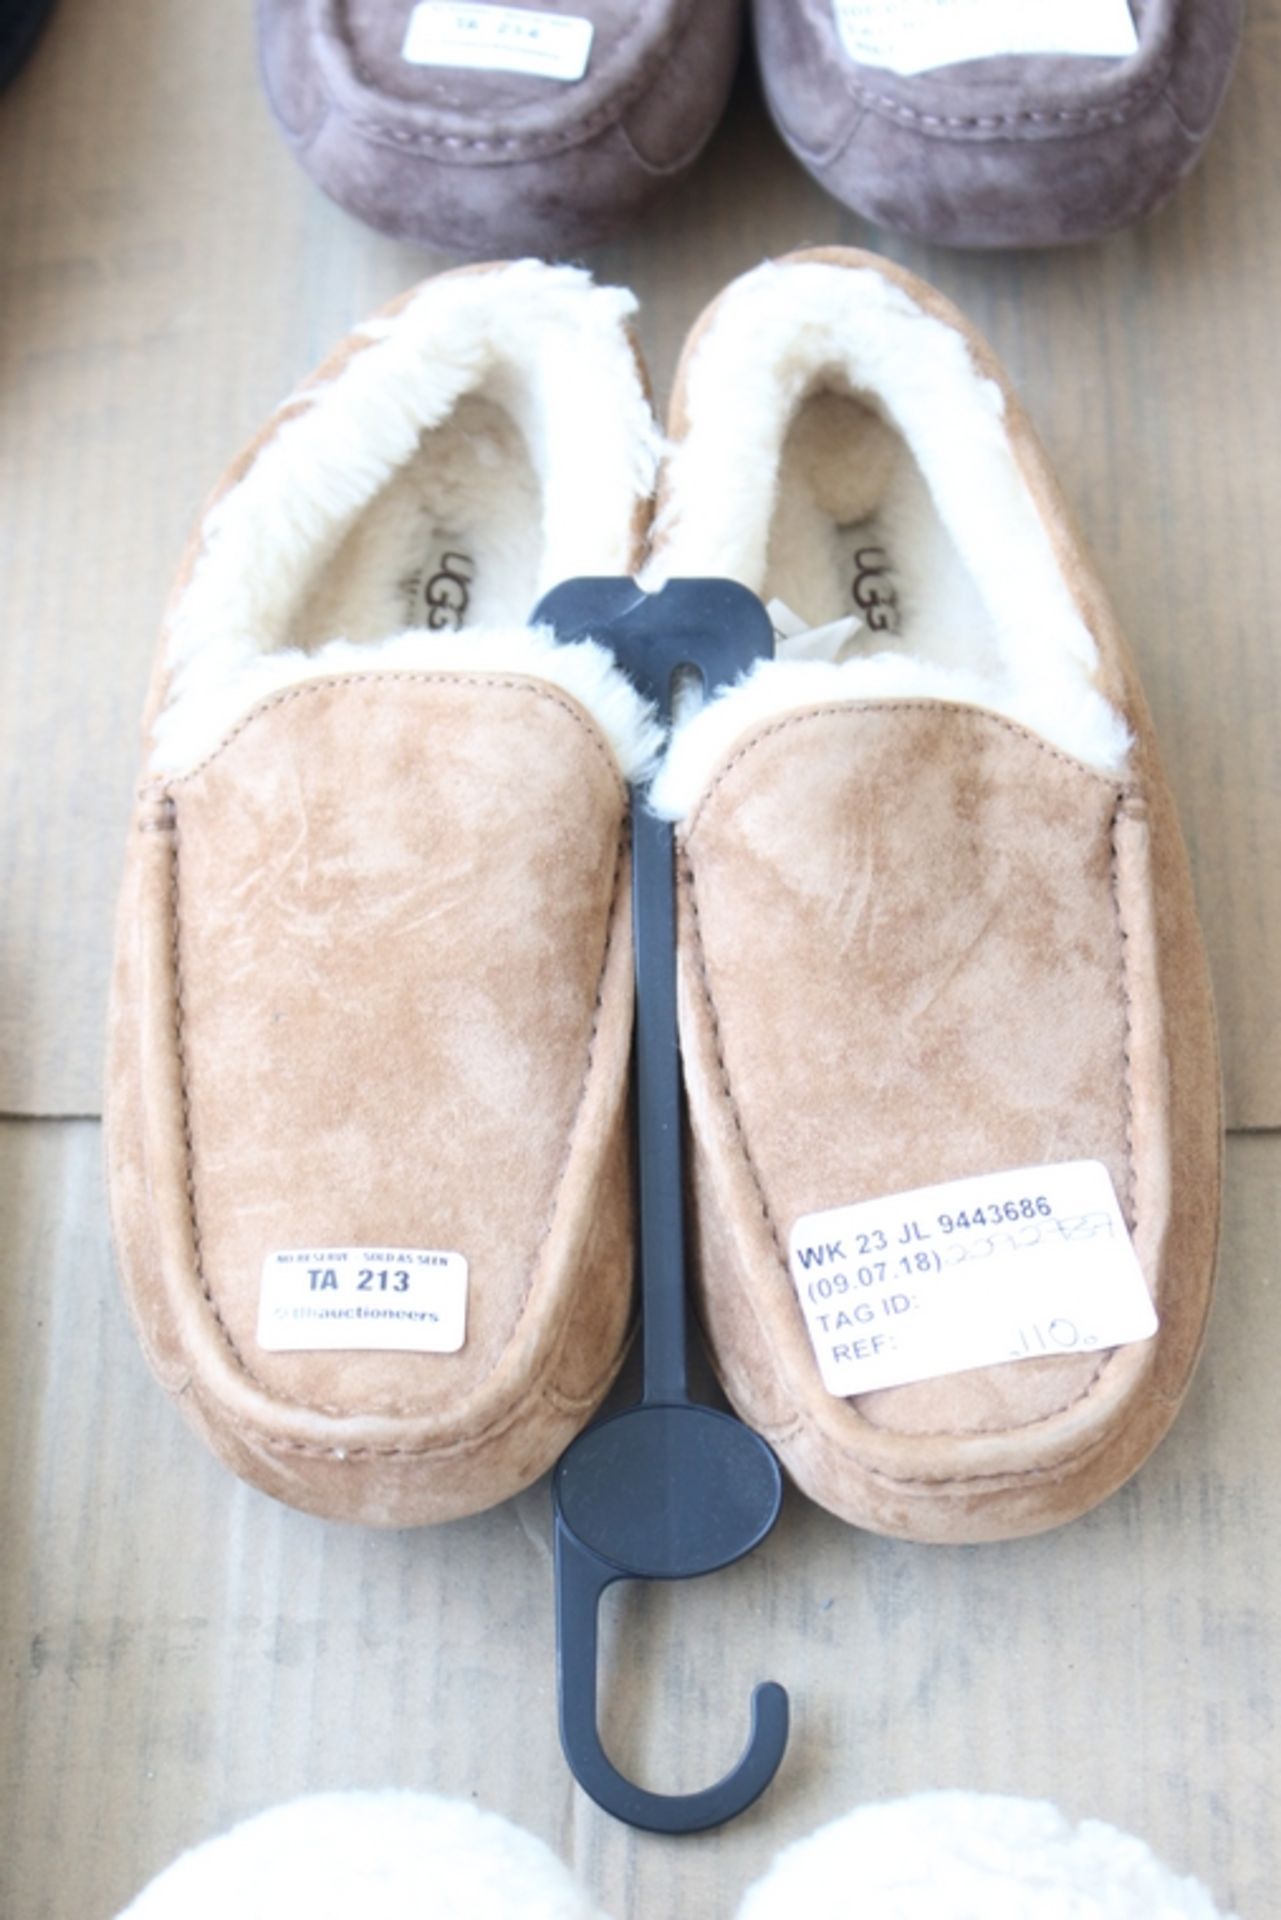 1X PAIR OF UGG SLIPPERS SIZE 7 RRP £110 (09.07.18) (2092787)